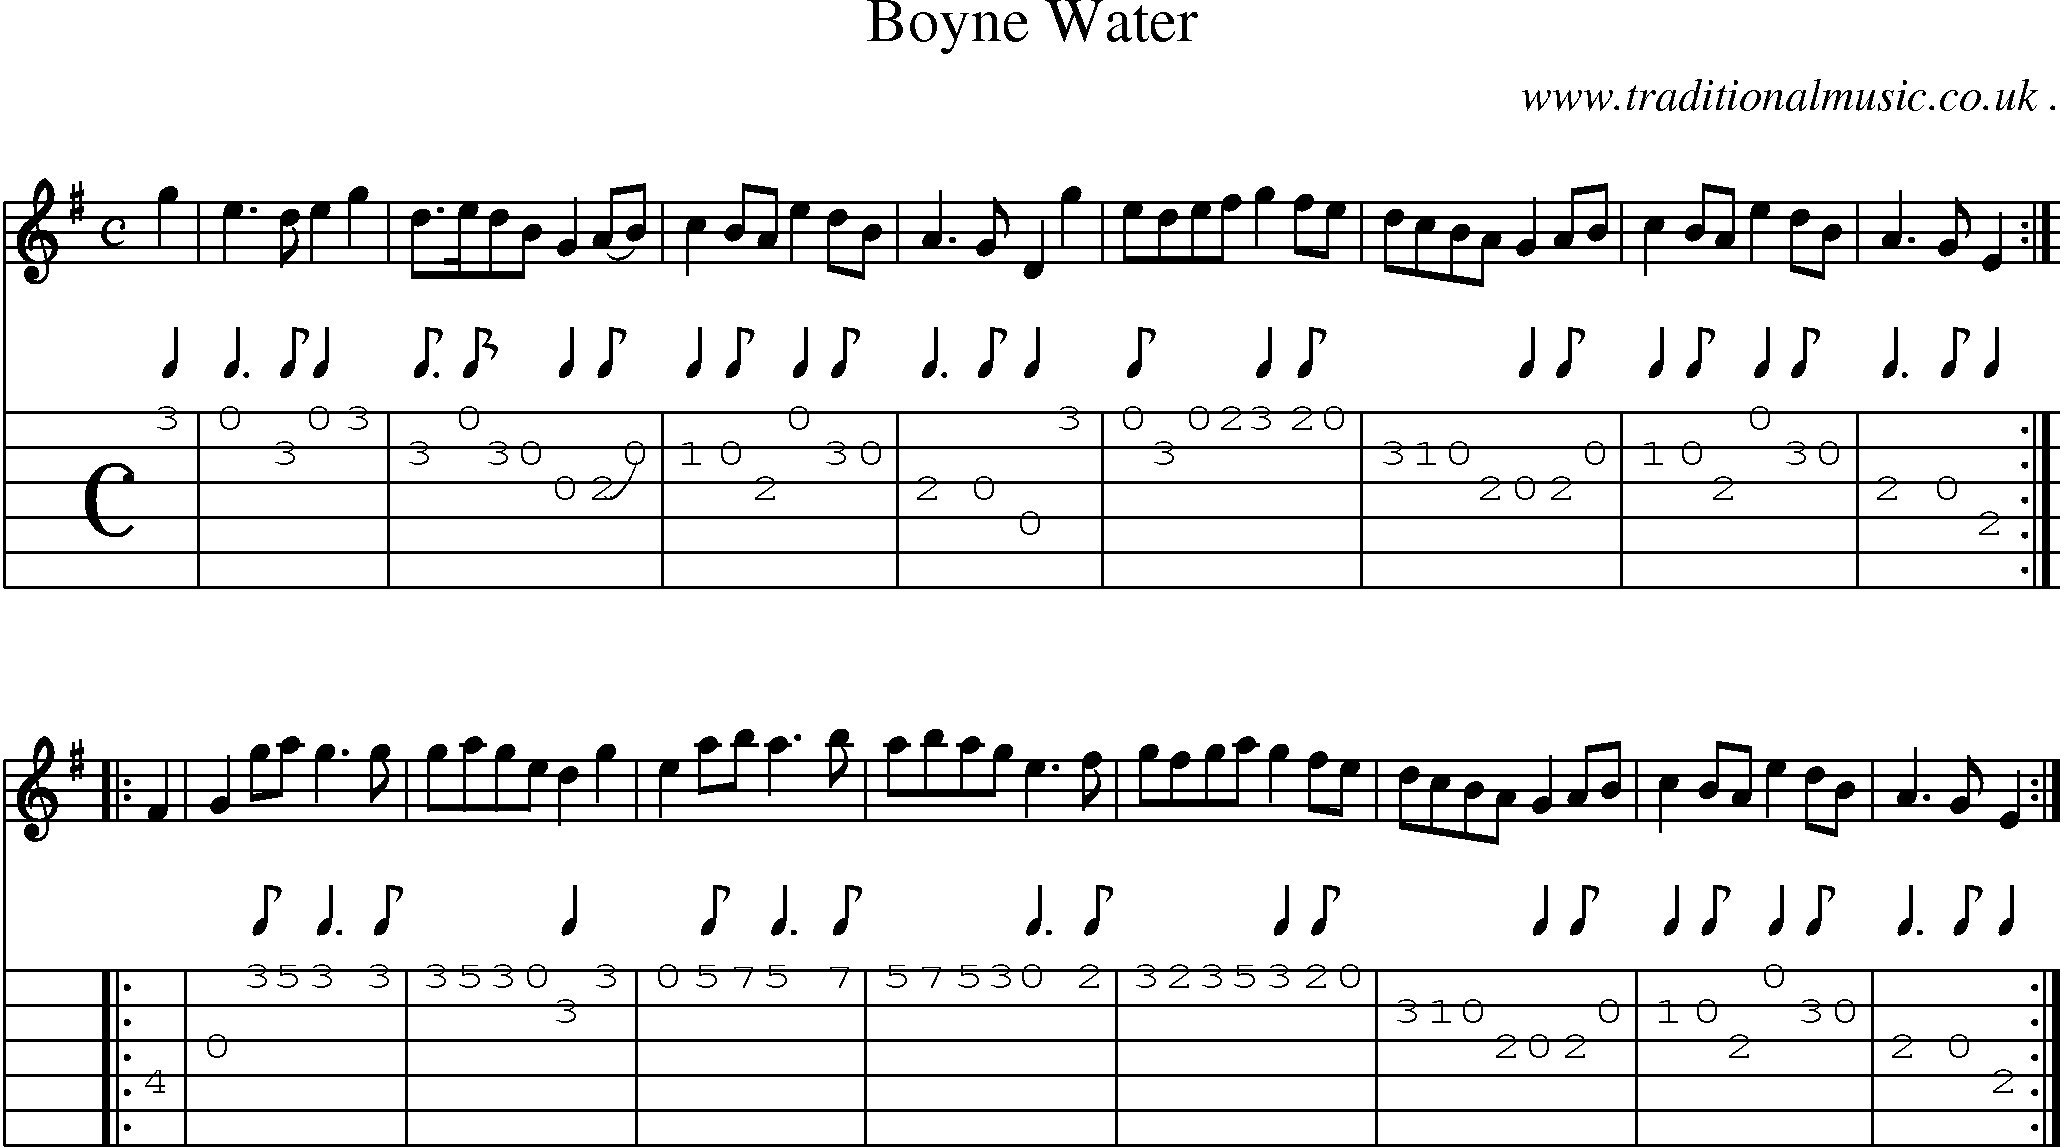 Sheet-Music and Guitar Tabs for Boyne Water